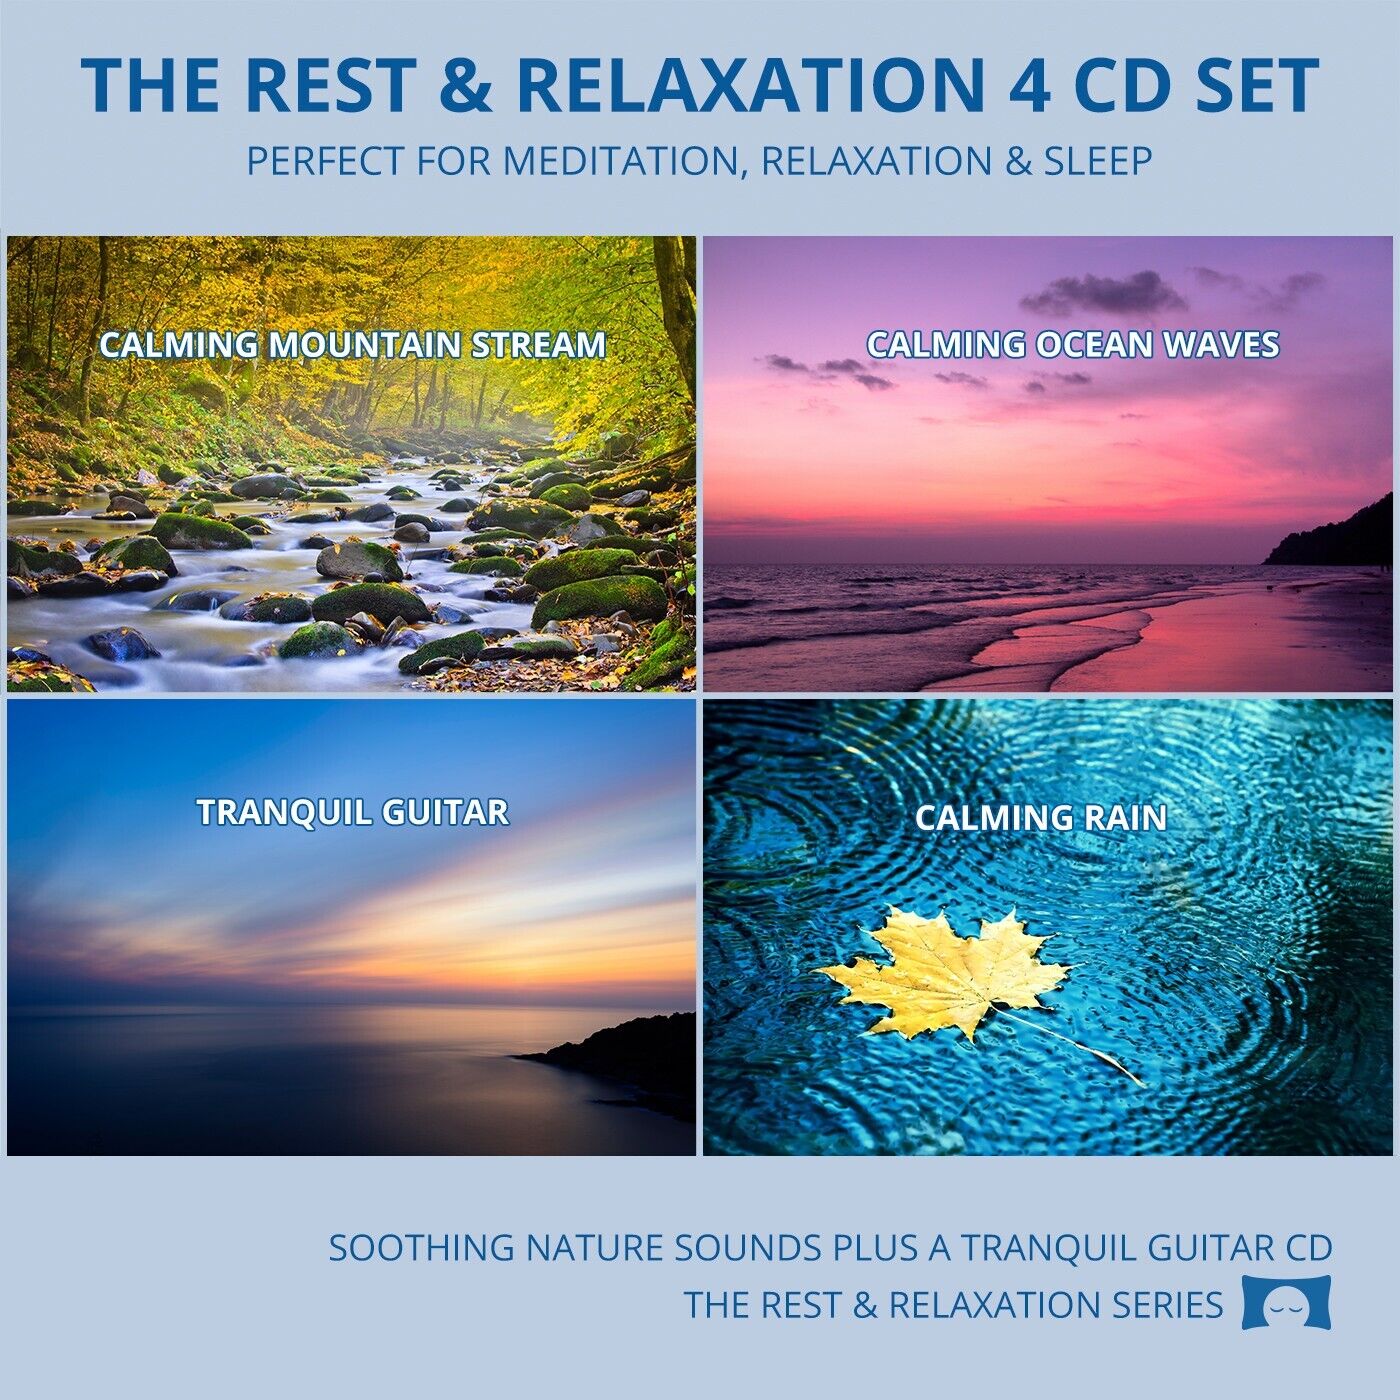 Relaxing Nature Sounds 4 CD Set - for Meditation, Relaxation and Sleep - Used